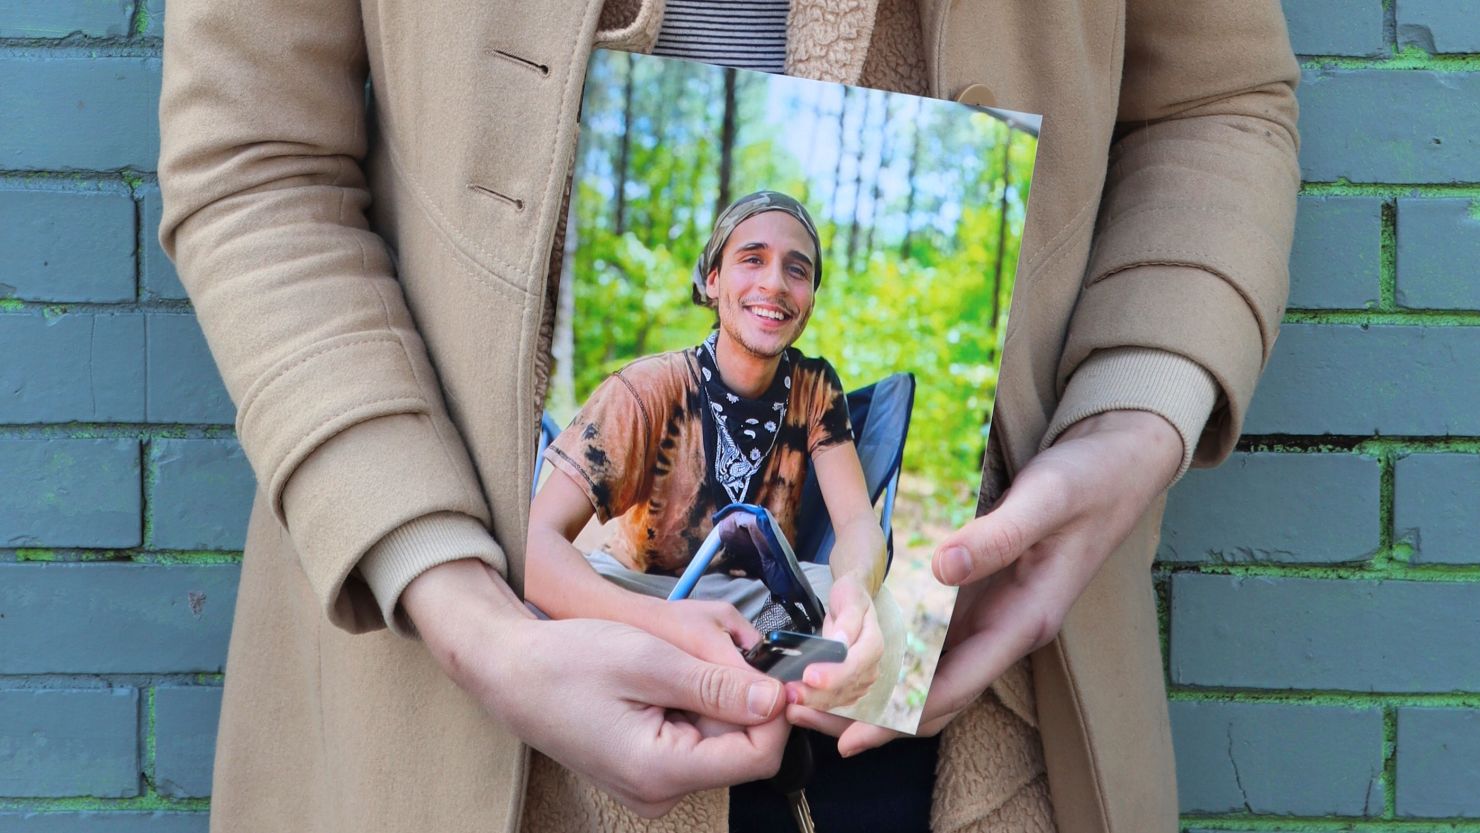 Vienna holds a photo of her slain partner, Tortuguita, in Atlanta on January 26, 2023. Officials have said officers fatally shot Tortuguita in self-defense after the protester shot a trooper on on January 18, 2023, but activists have disputed that account.